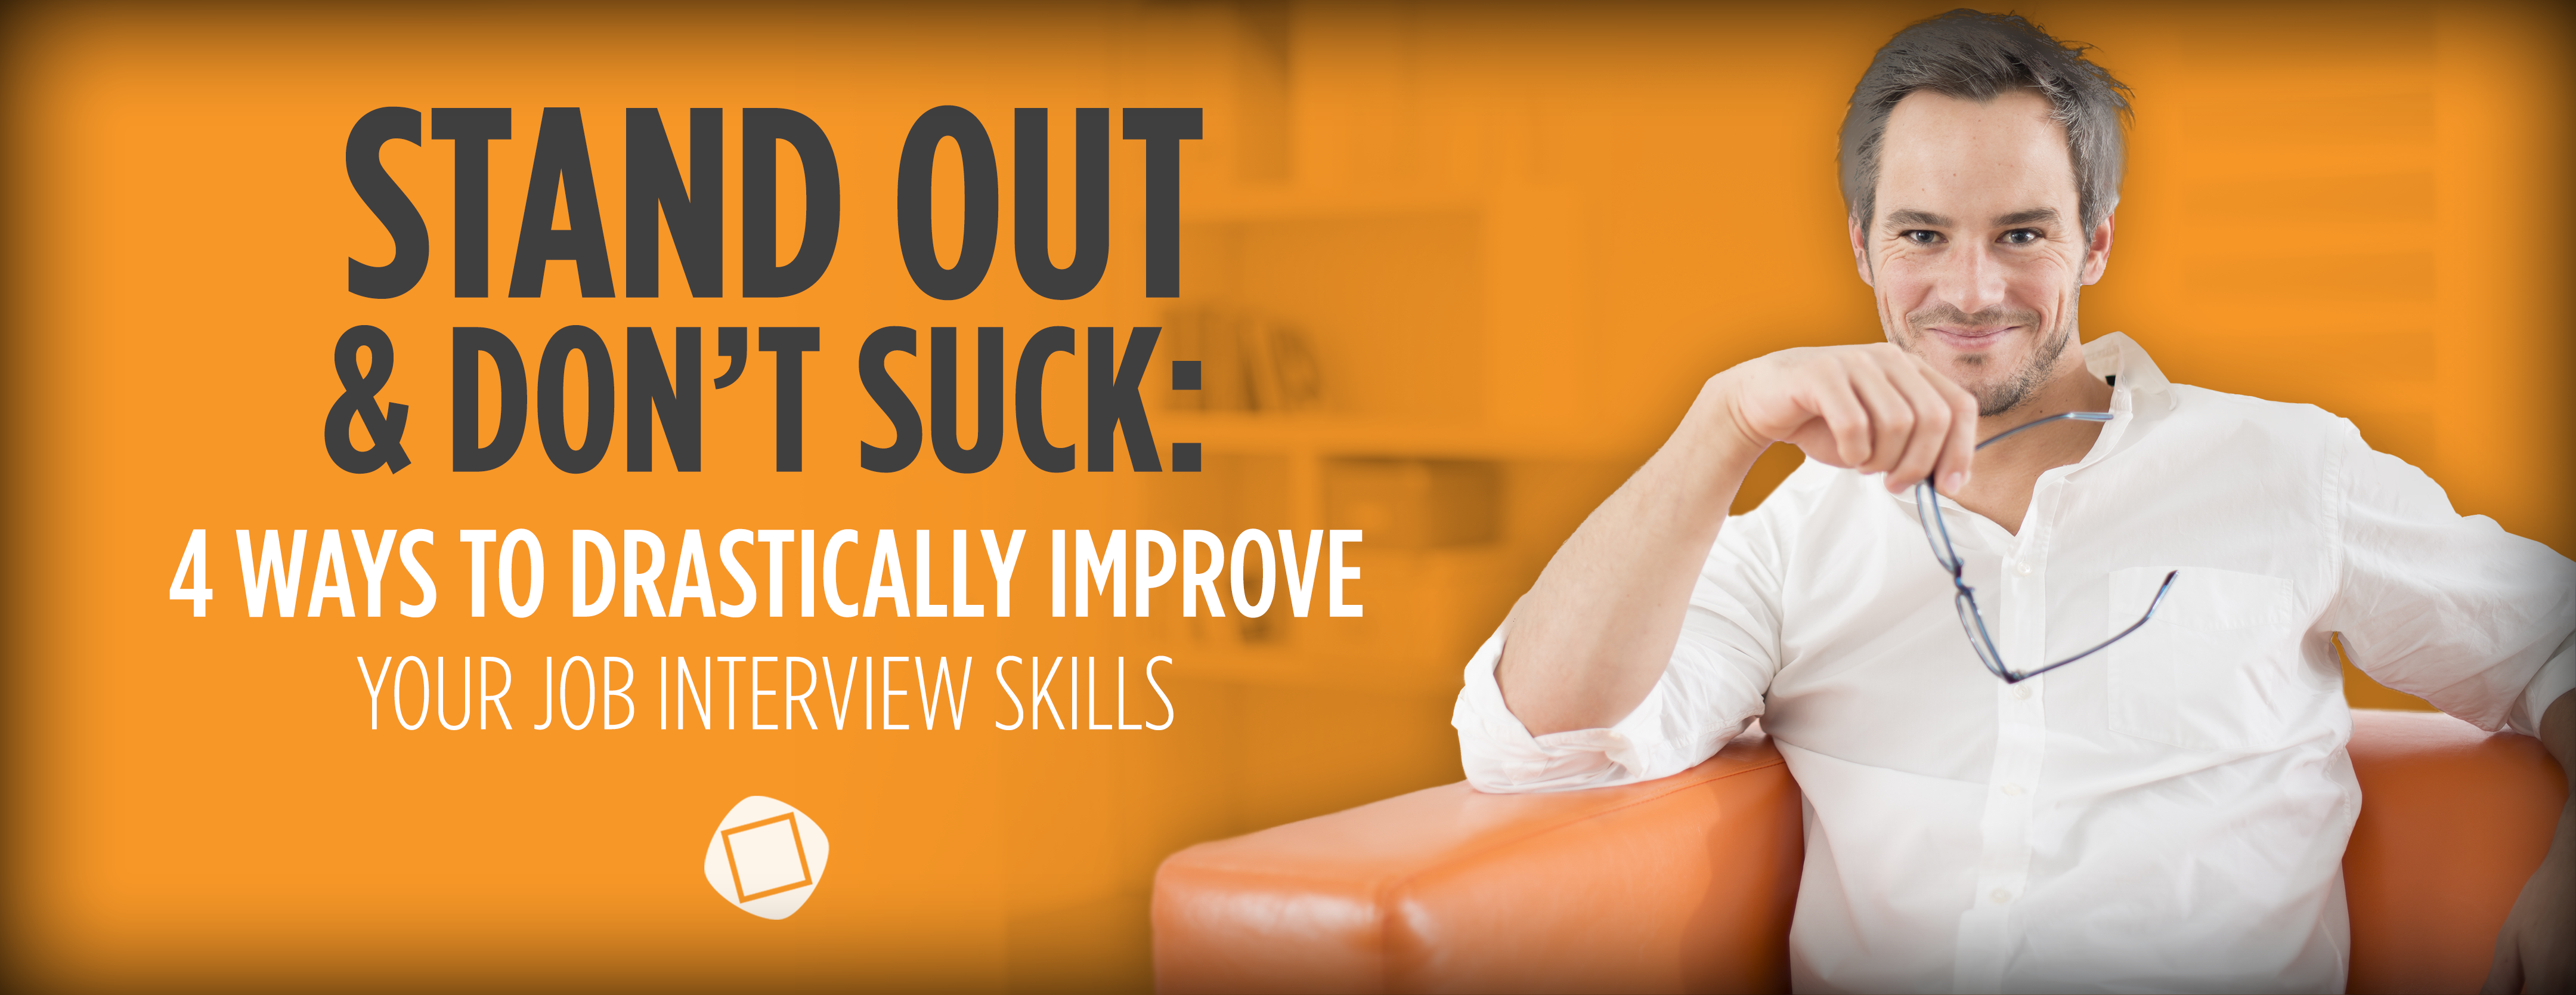 Stand Out and Don’t Suck: 4 Ways to Drastically Improve Your Job Interview Skills